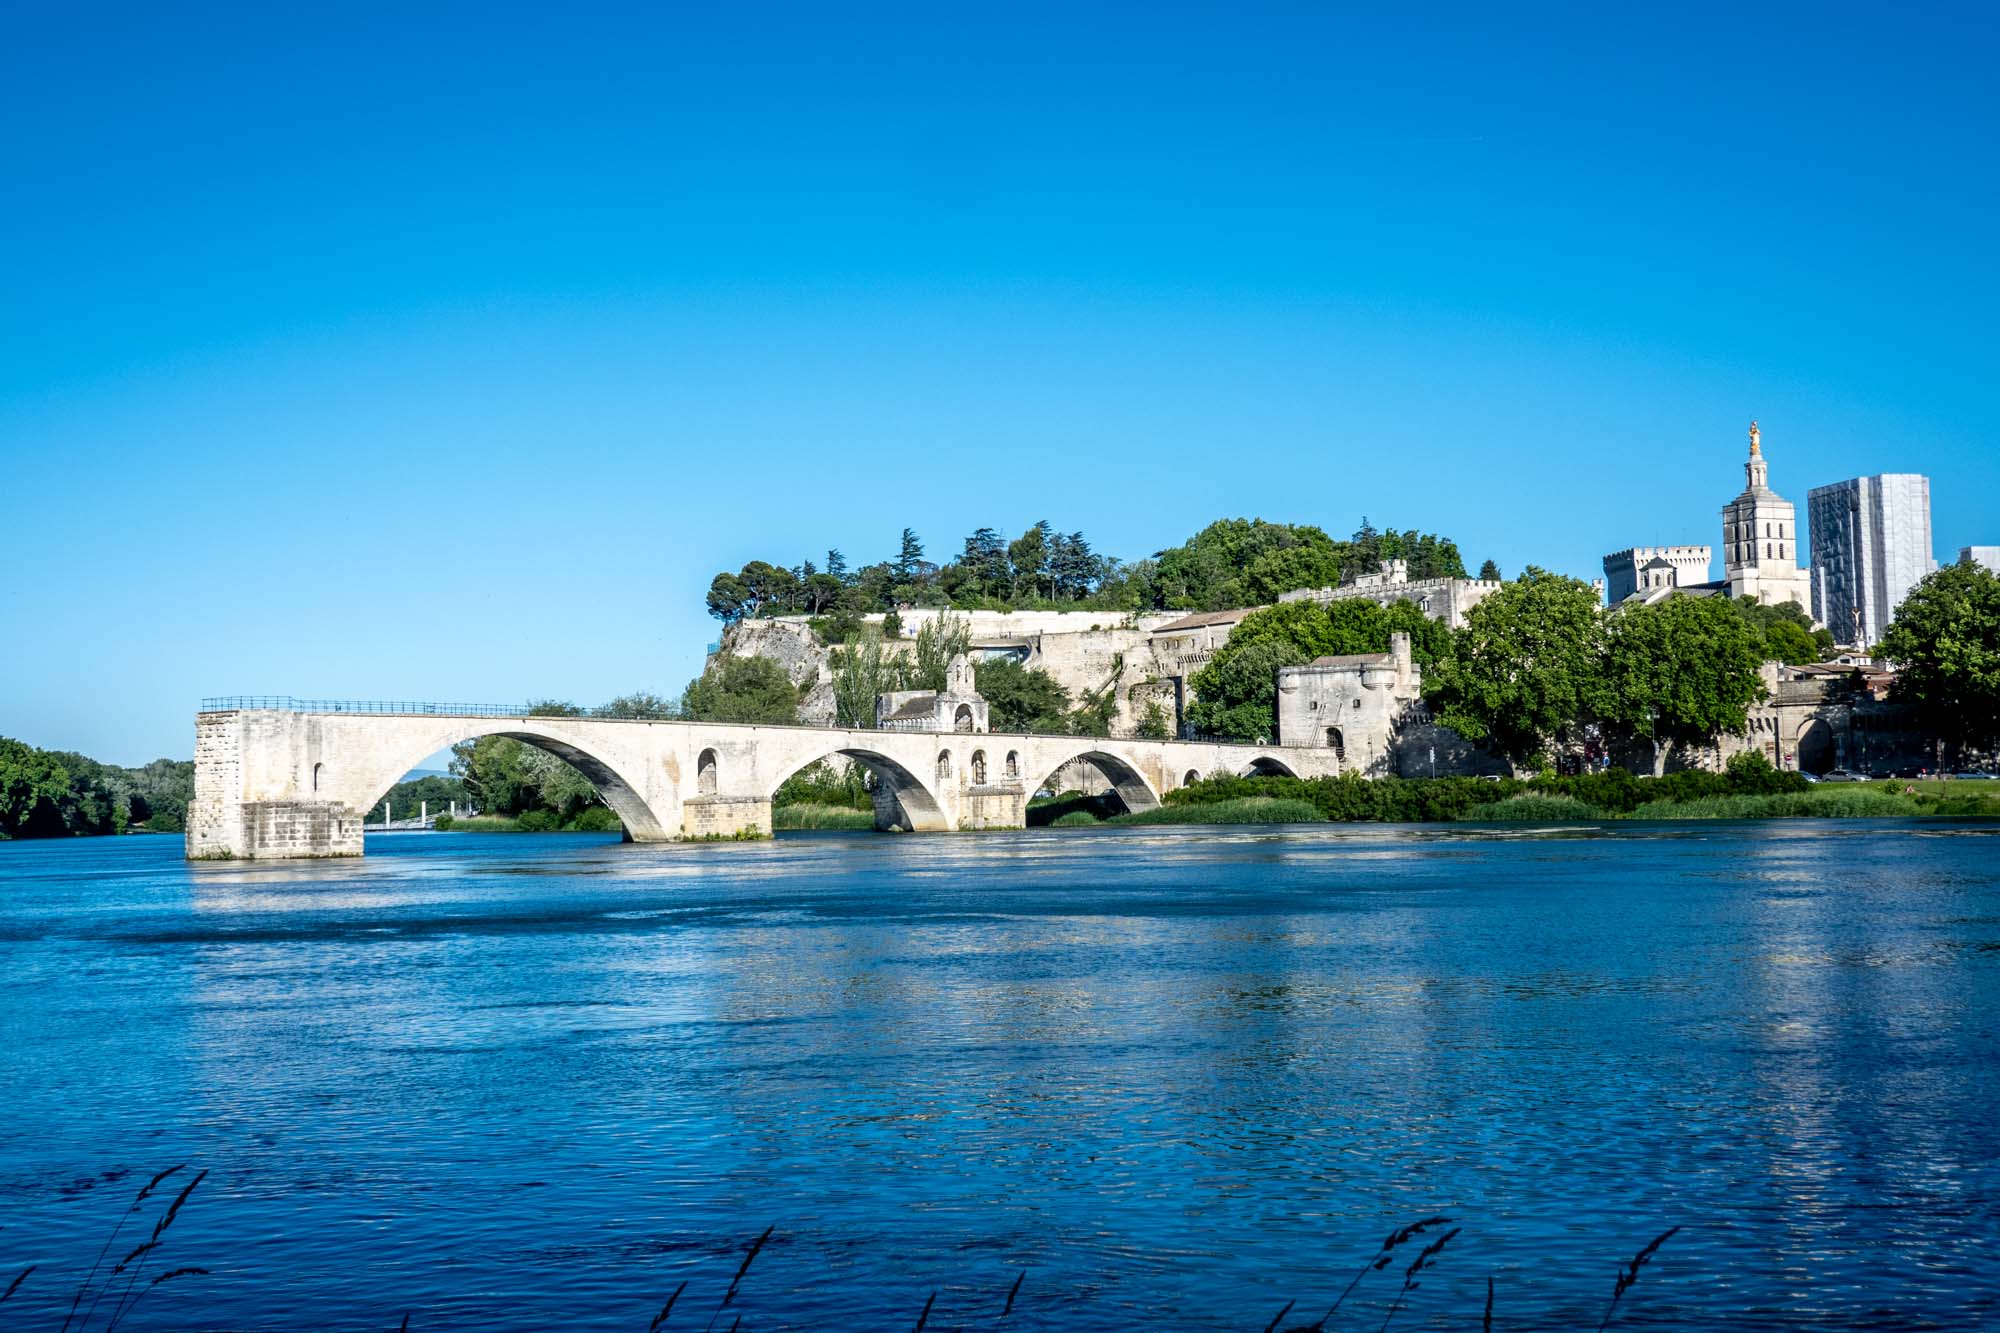 The ruins of the Pont d'Avignon stretch out into the river but do not reach the other bank